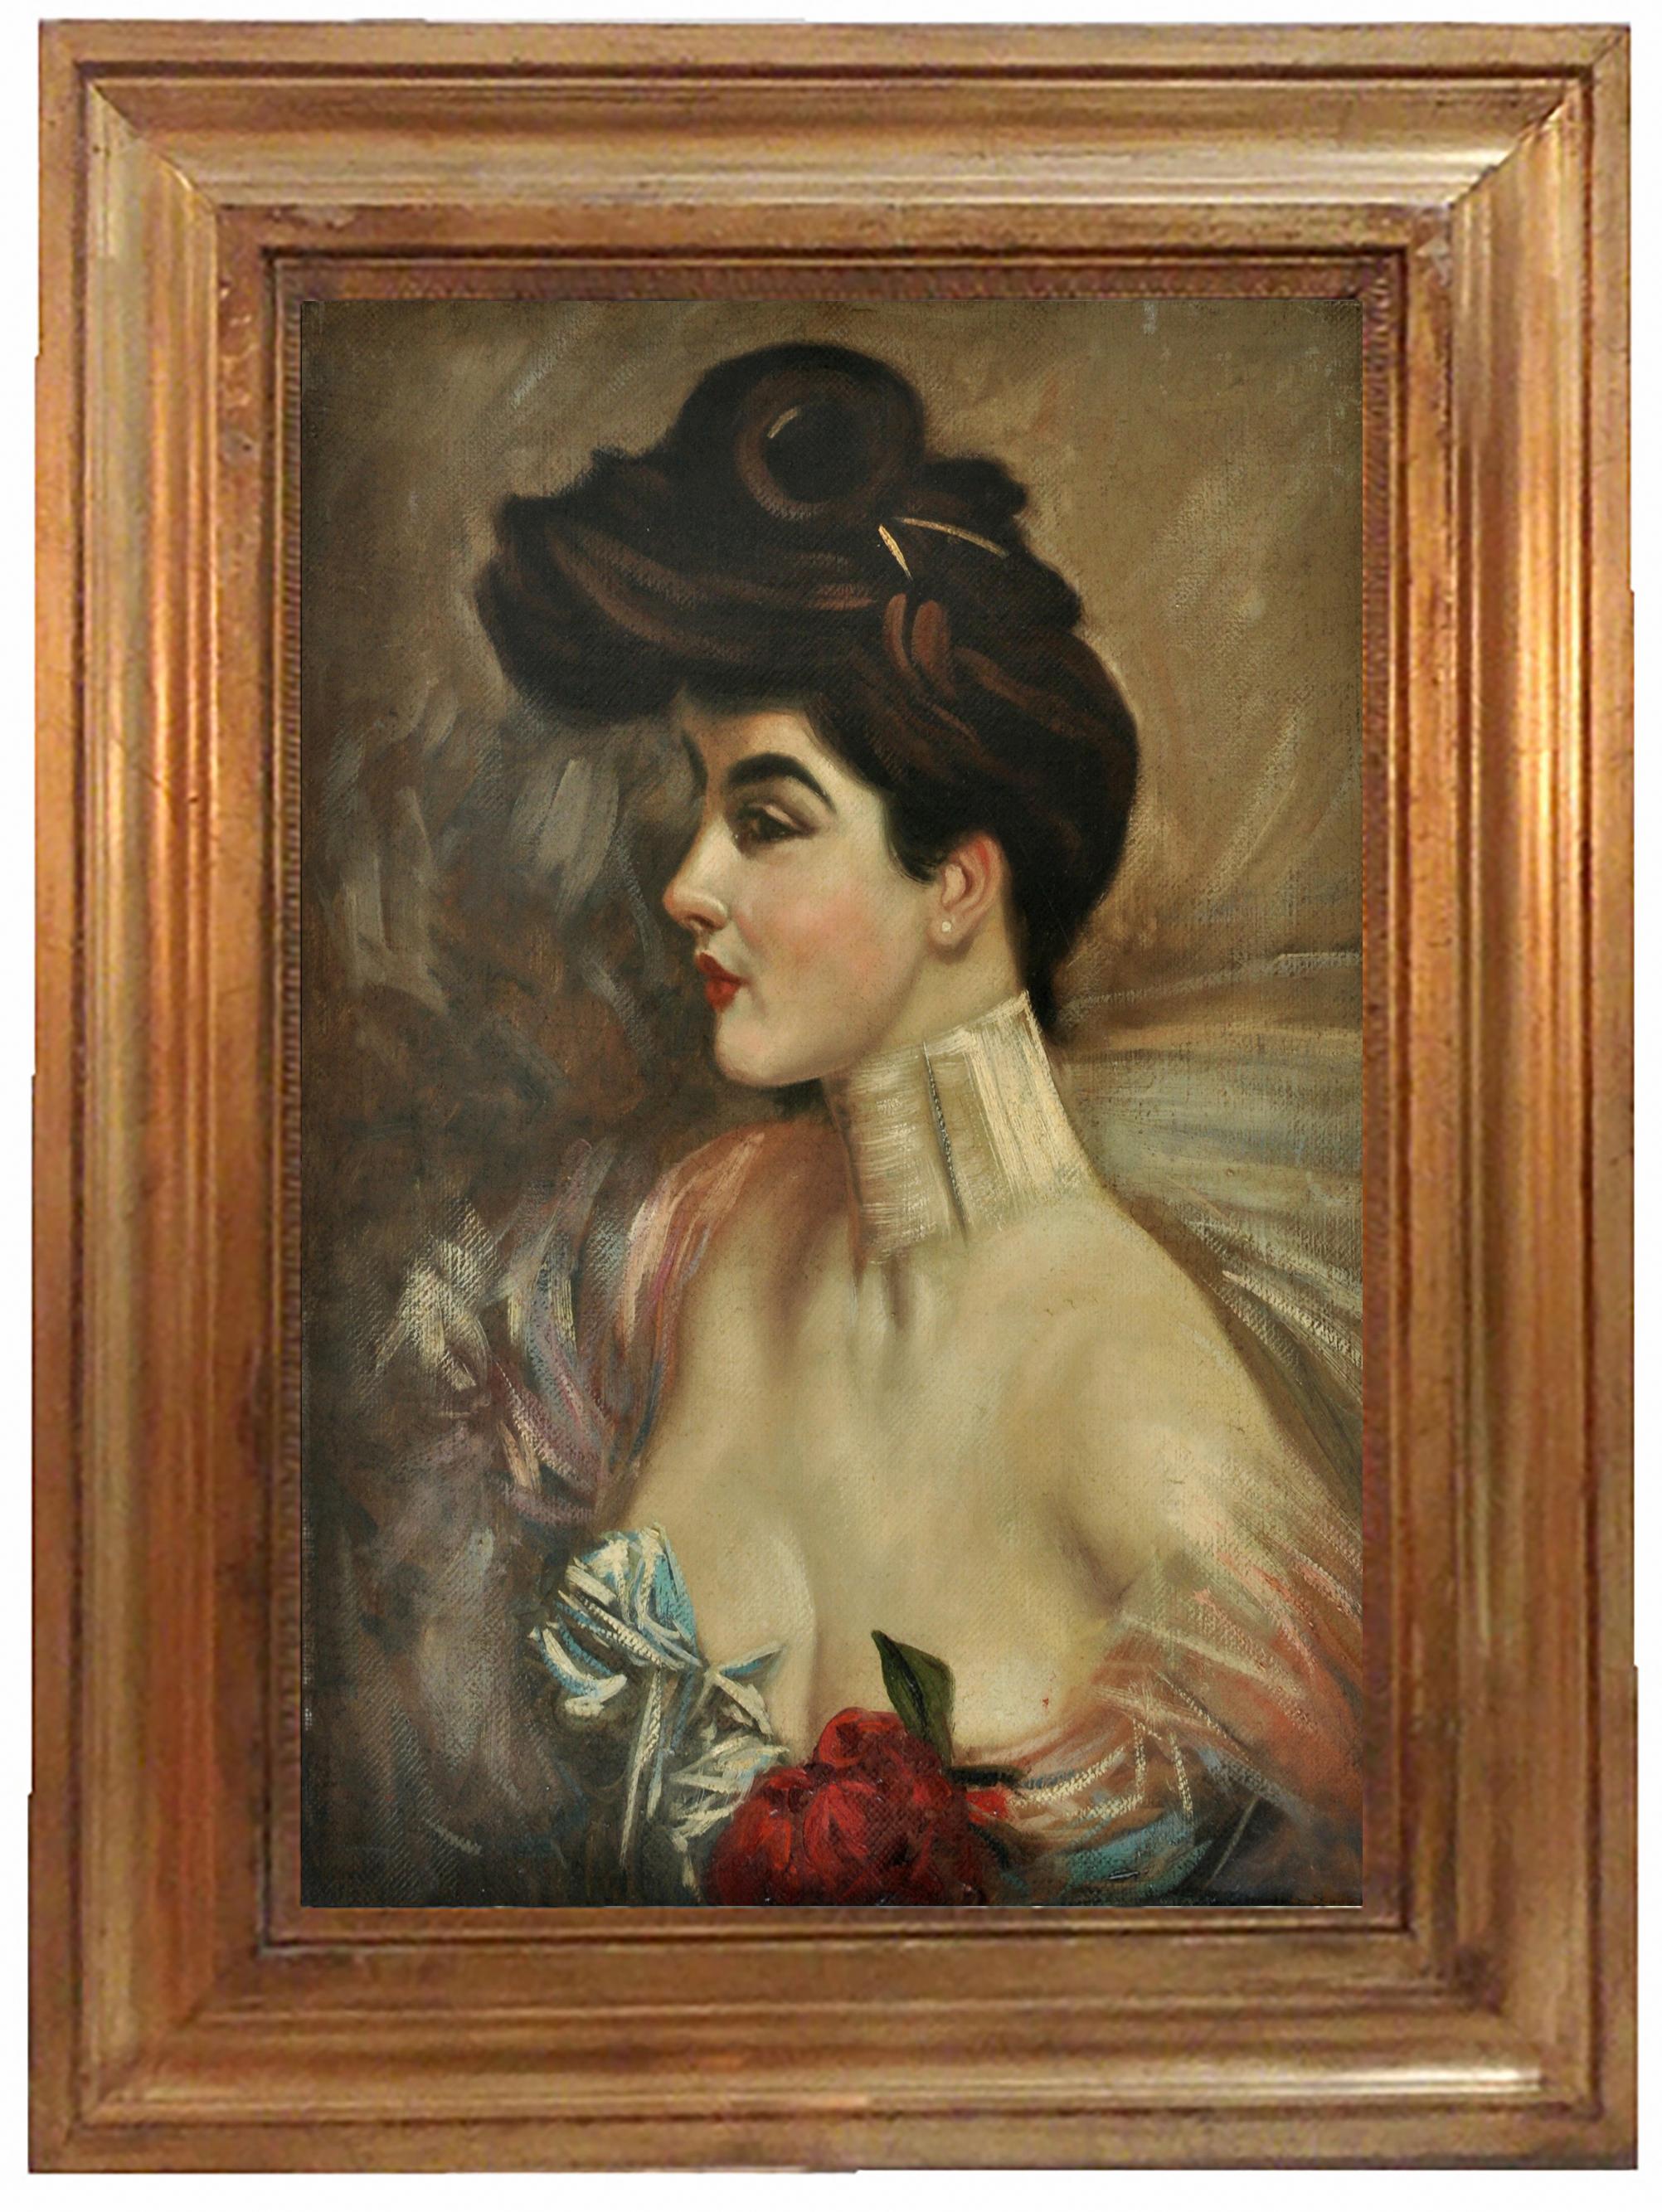 Ciro De Rosa - LADY'S PORTRAIT - In the Manner of G. Boldini - Italian Oil  on Canvas Painting For Sale at 1stDibs | manner rosa, milan richir, rosa  italia 2002